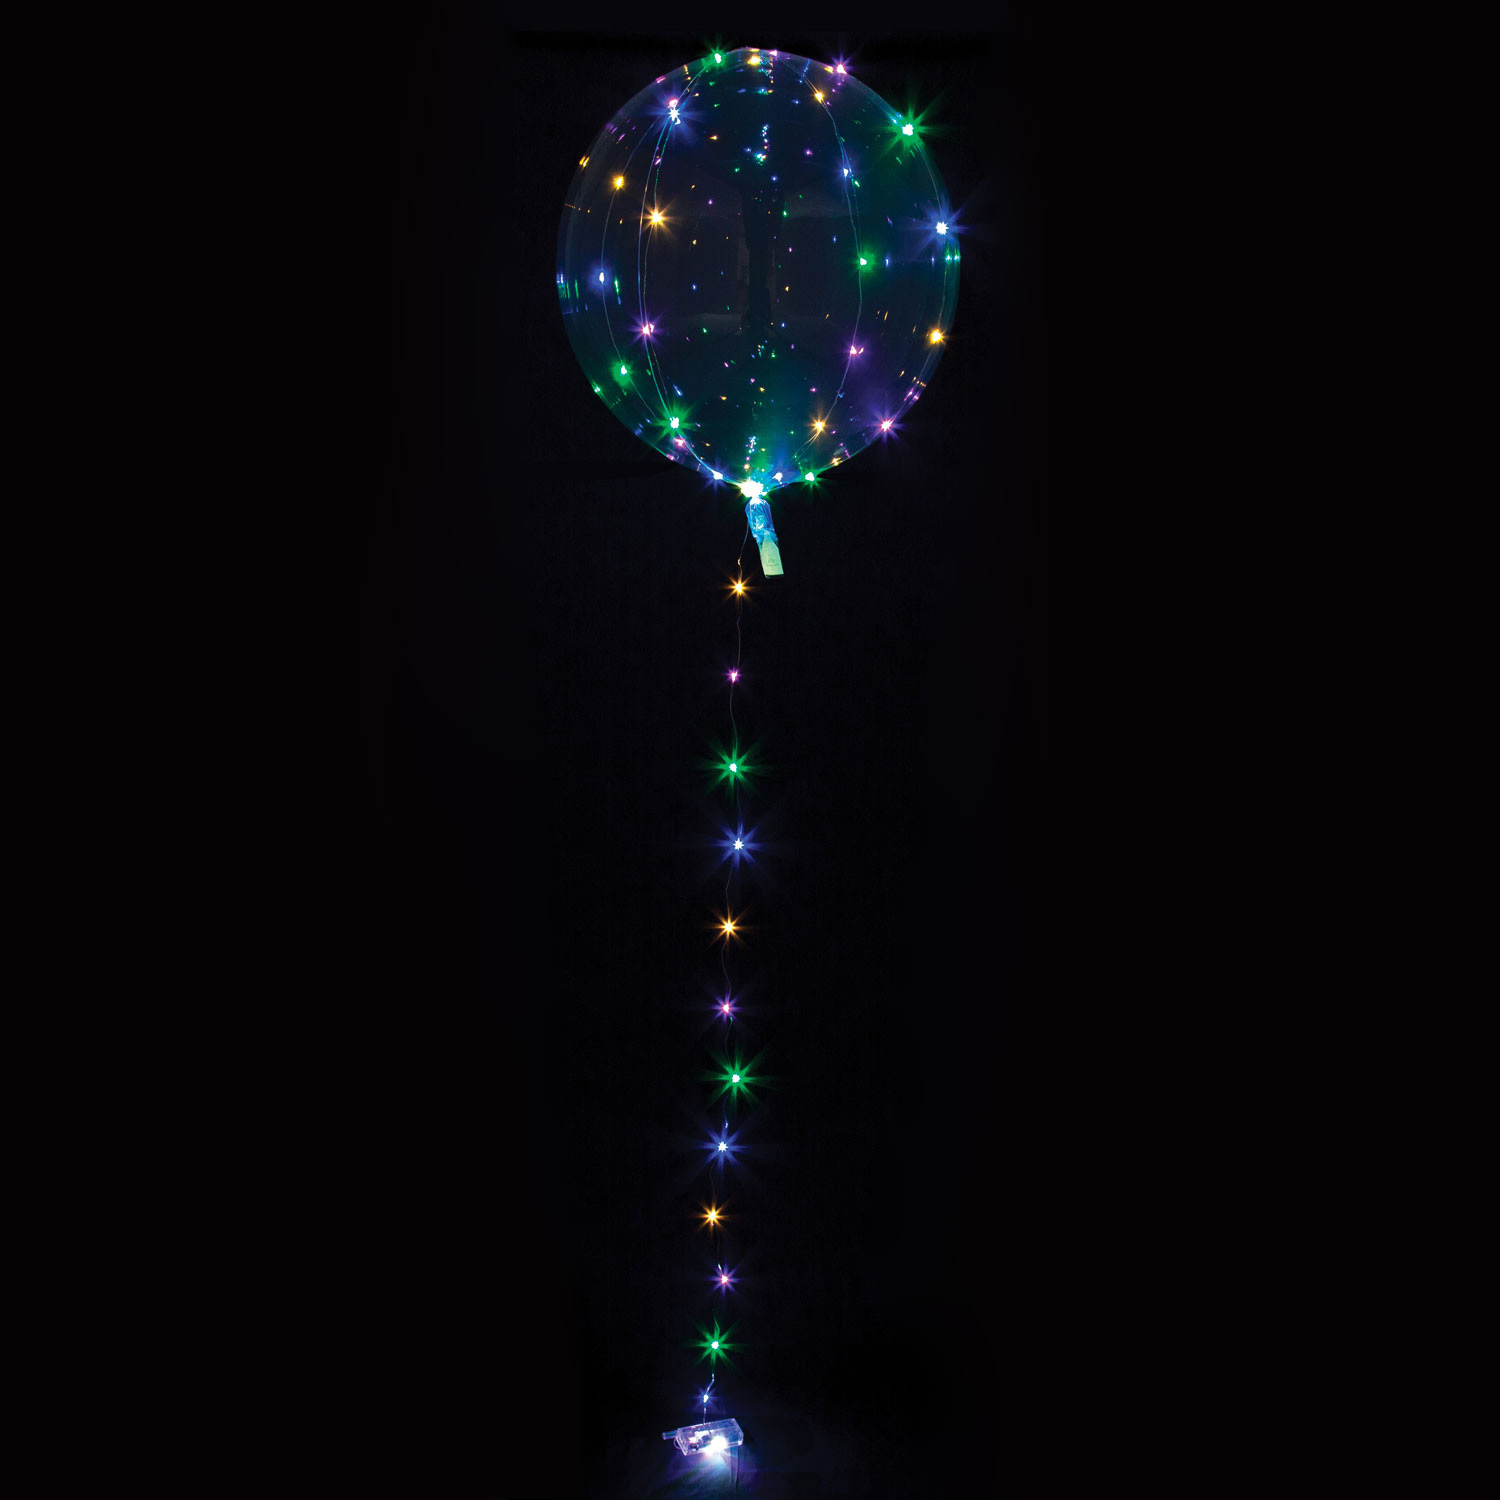 Crystal Clearz Multicolored 32-Inch LED Balloon | Card Factory